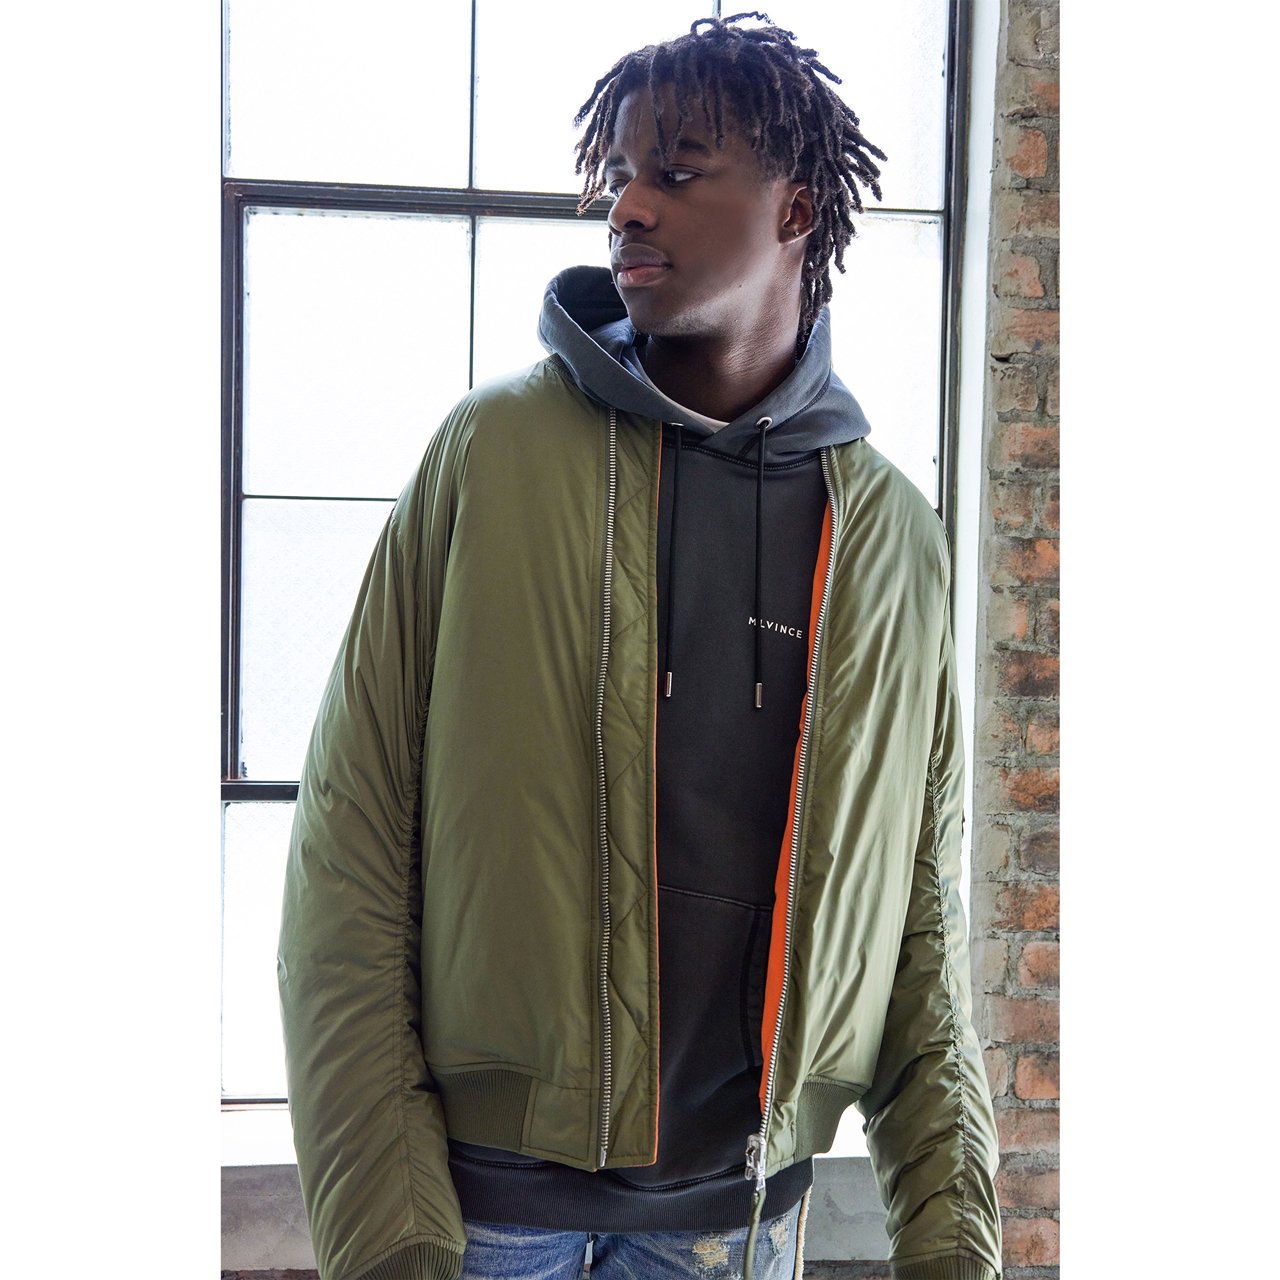 MLVINCE (メルヴィンス)23AW/秋冬
REVERSIBLE LIMONTA DOWN MA-1 OLIVE
リモンタナイロンダウンMA-1 オリーブ